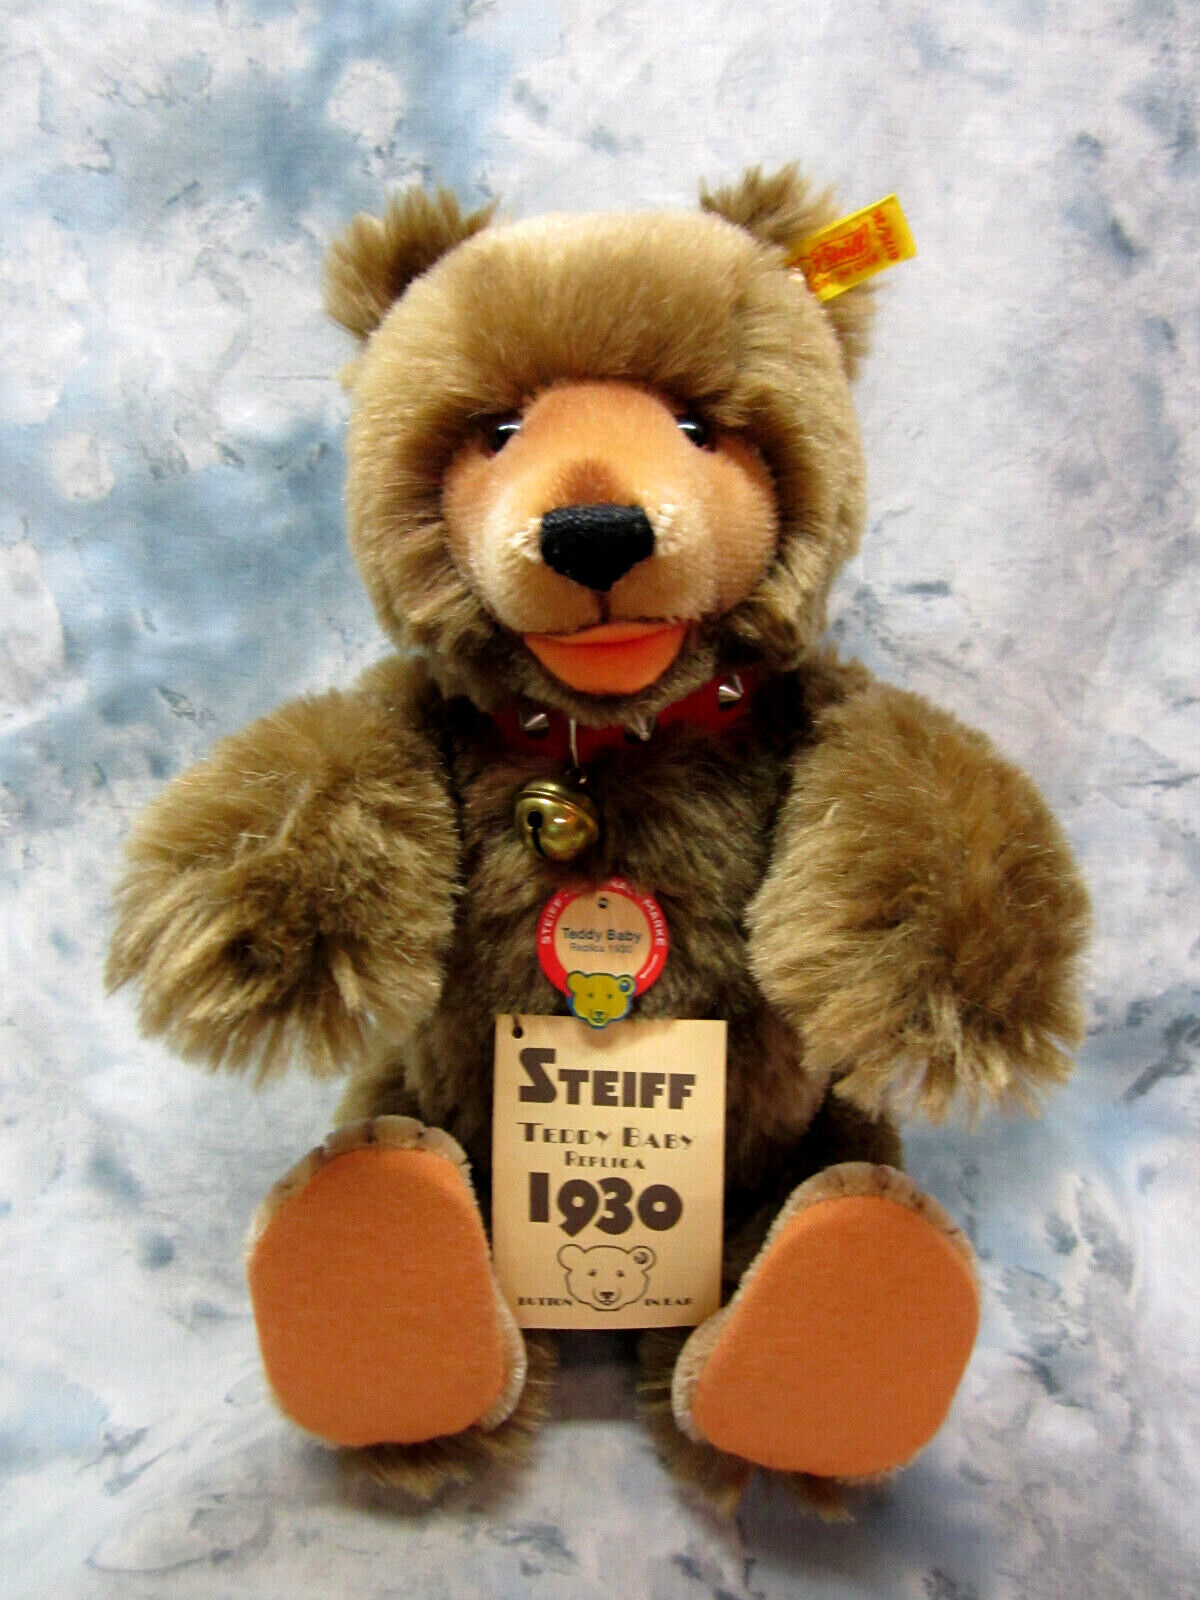 Collectible Steiff Mohair Teddy Baby Replica 1930 From 1988, 0175/35